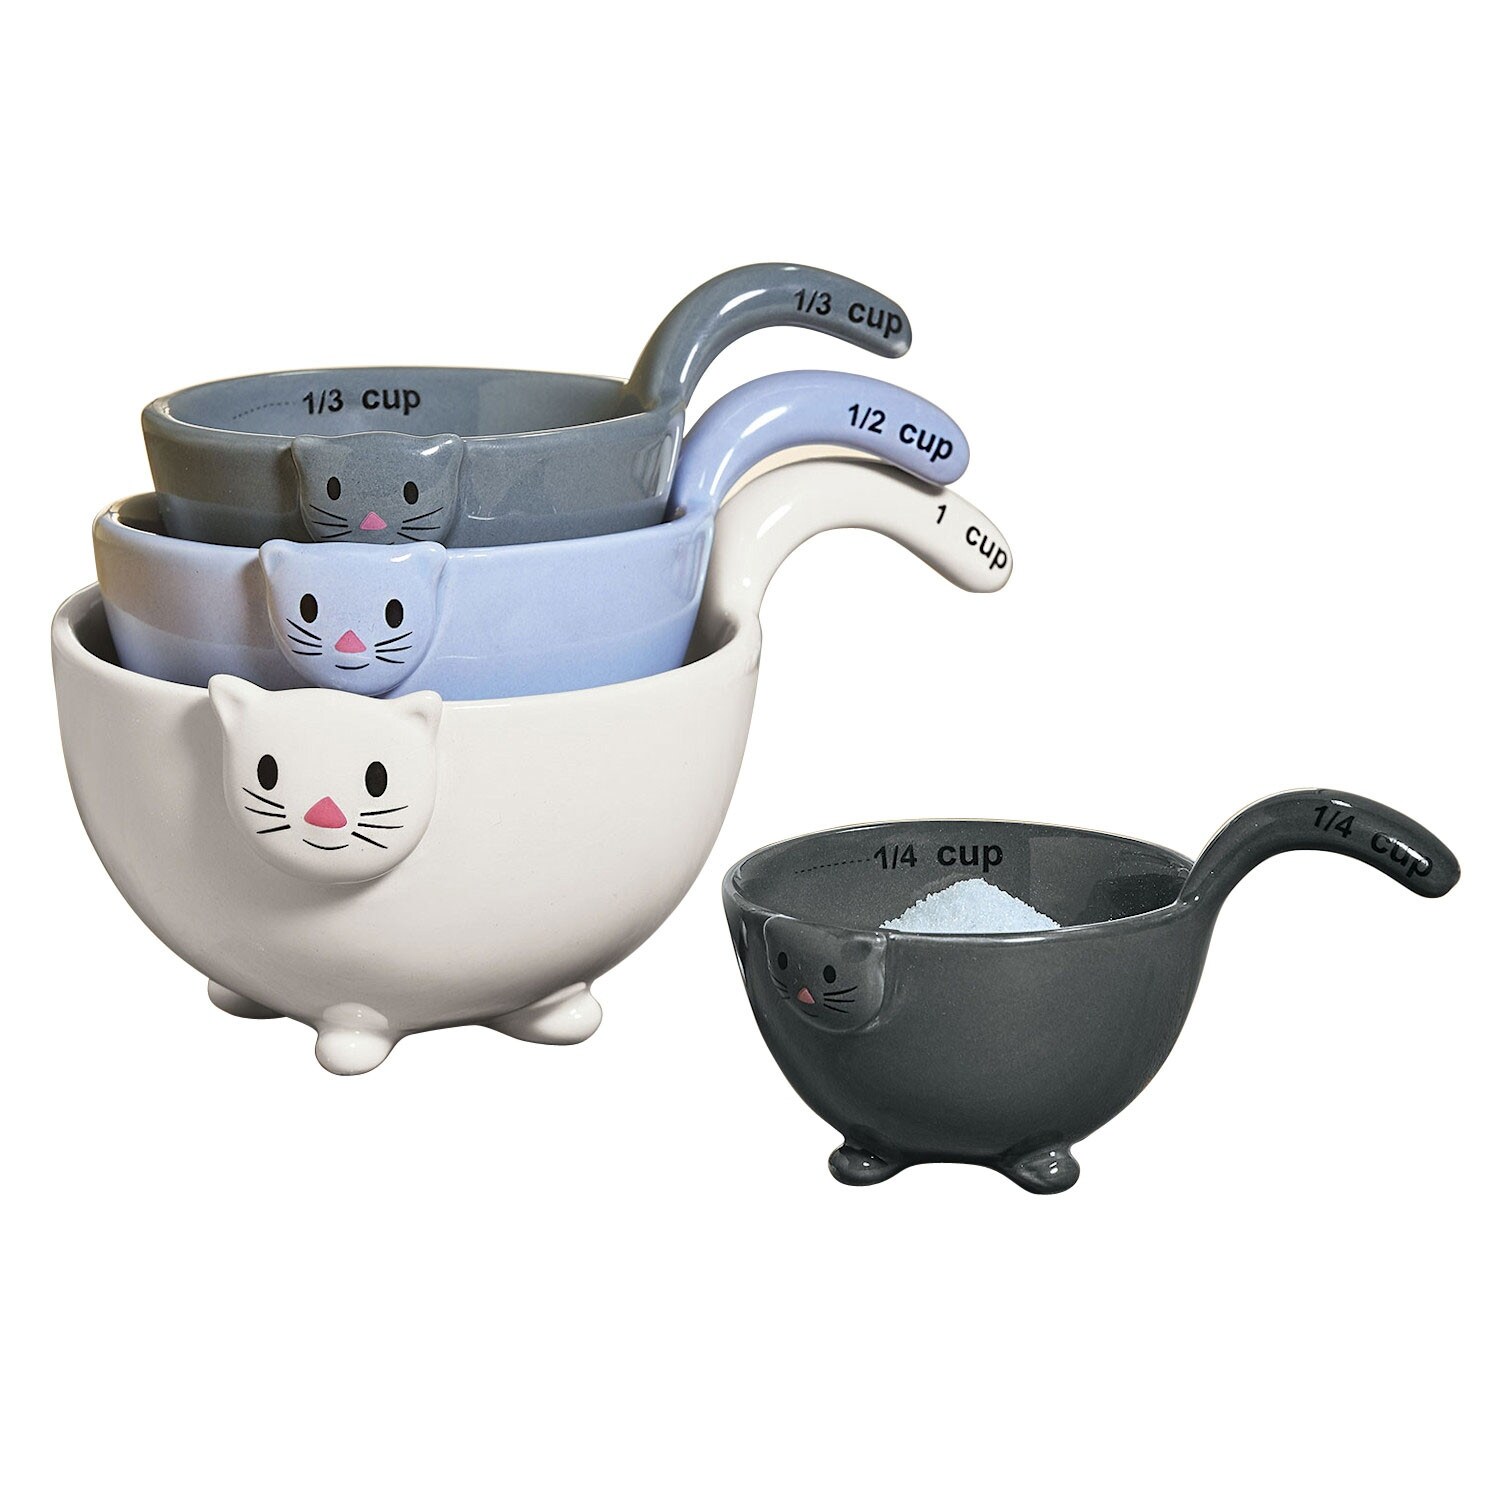 Cute Ceramic Cats Measuring Cups Set - Stackable Kitchen Utensils